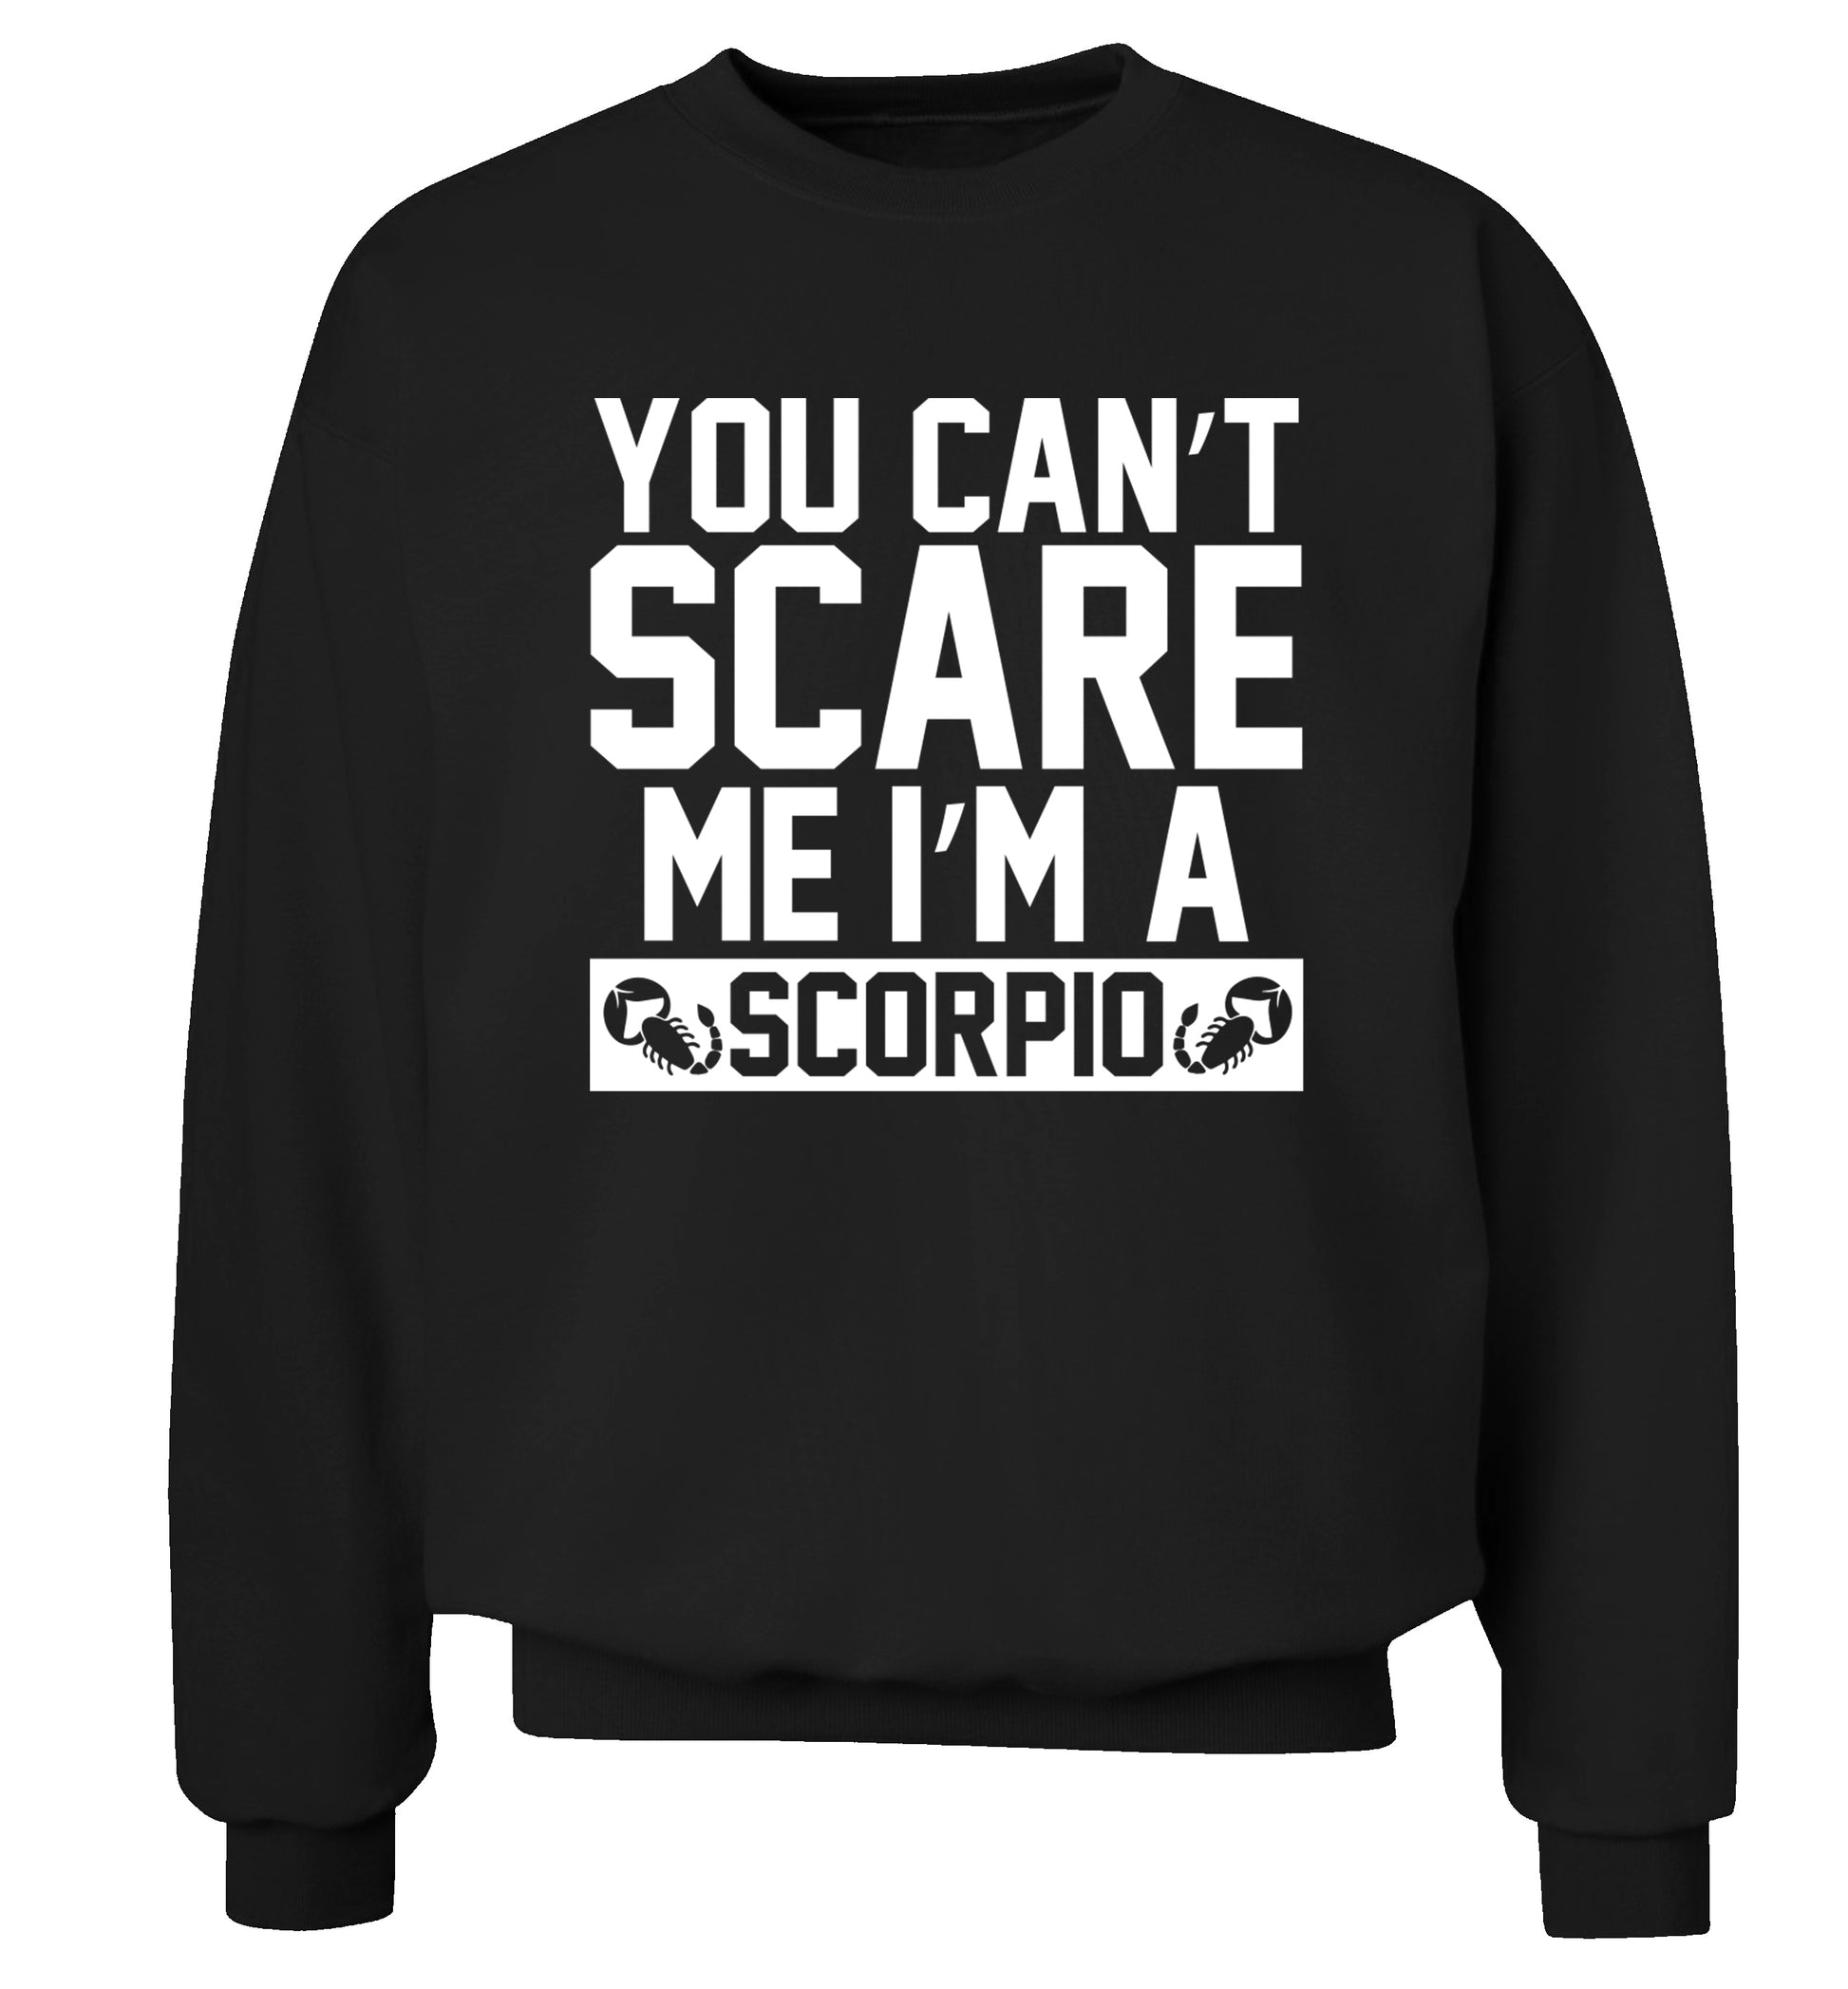 You can't scare me I'm a scorpio Adult's unisex black Sweater 2XL